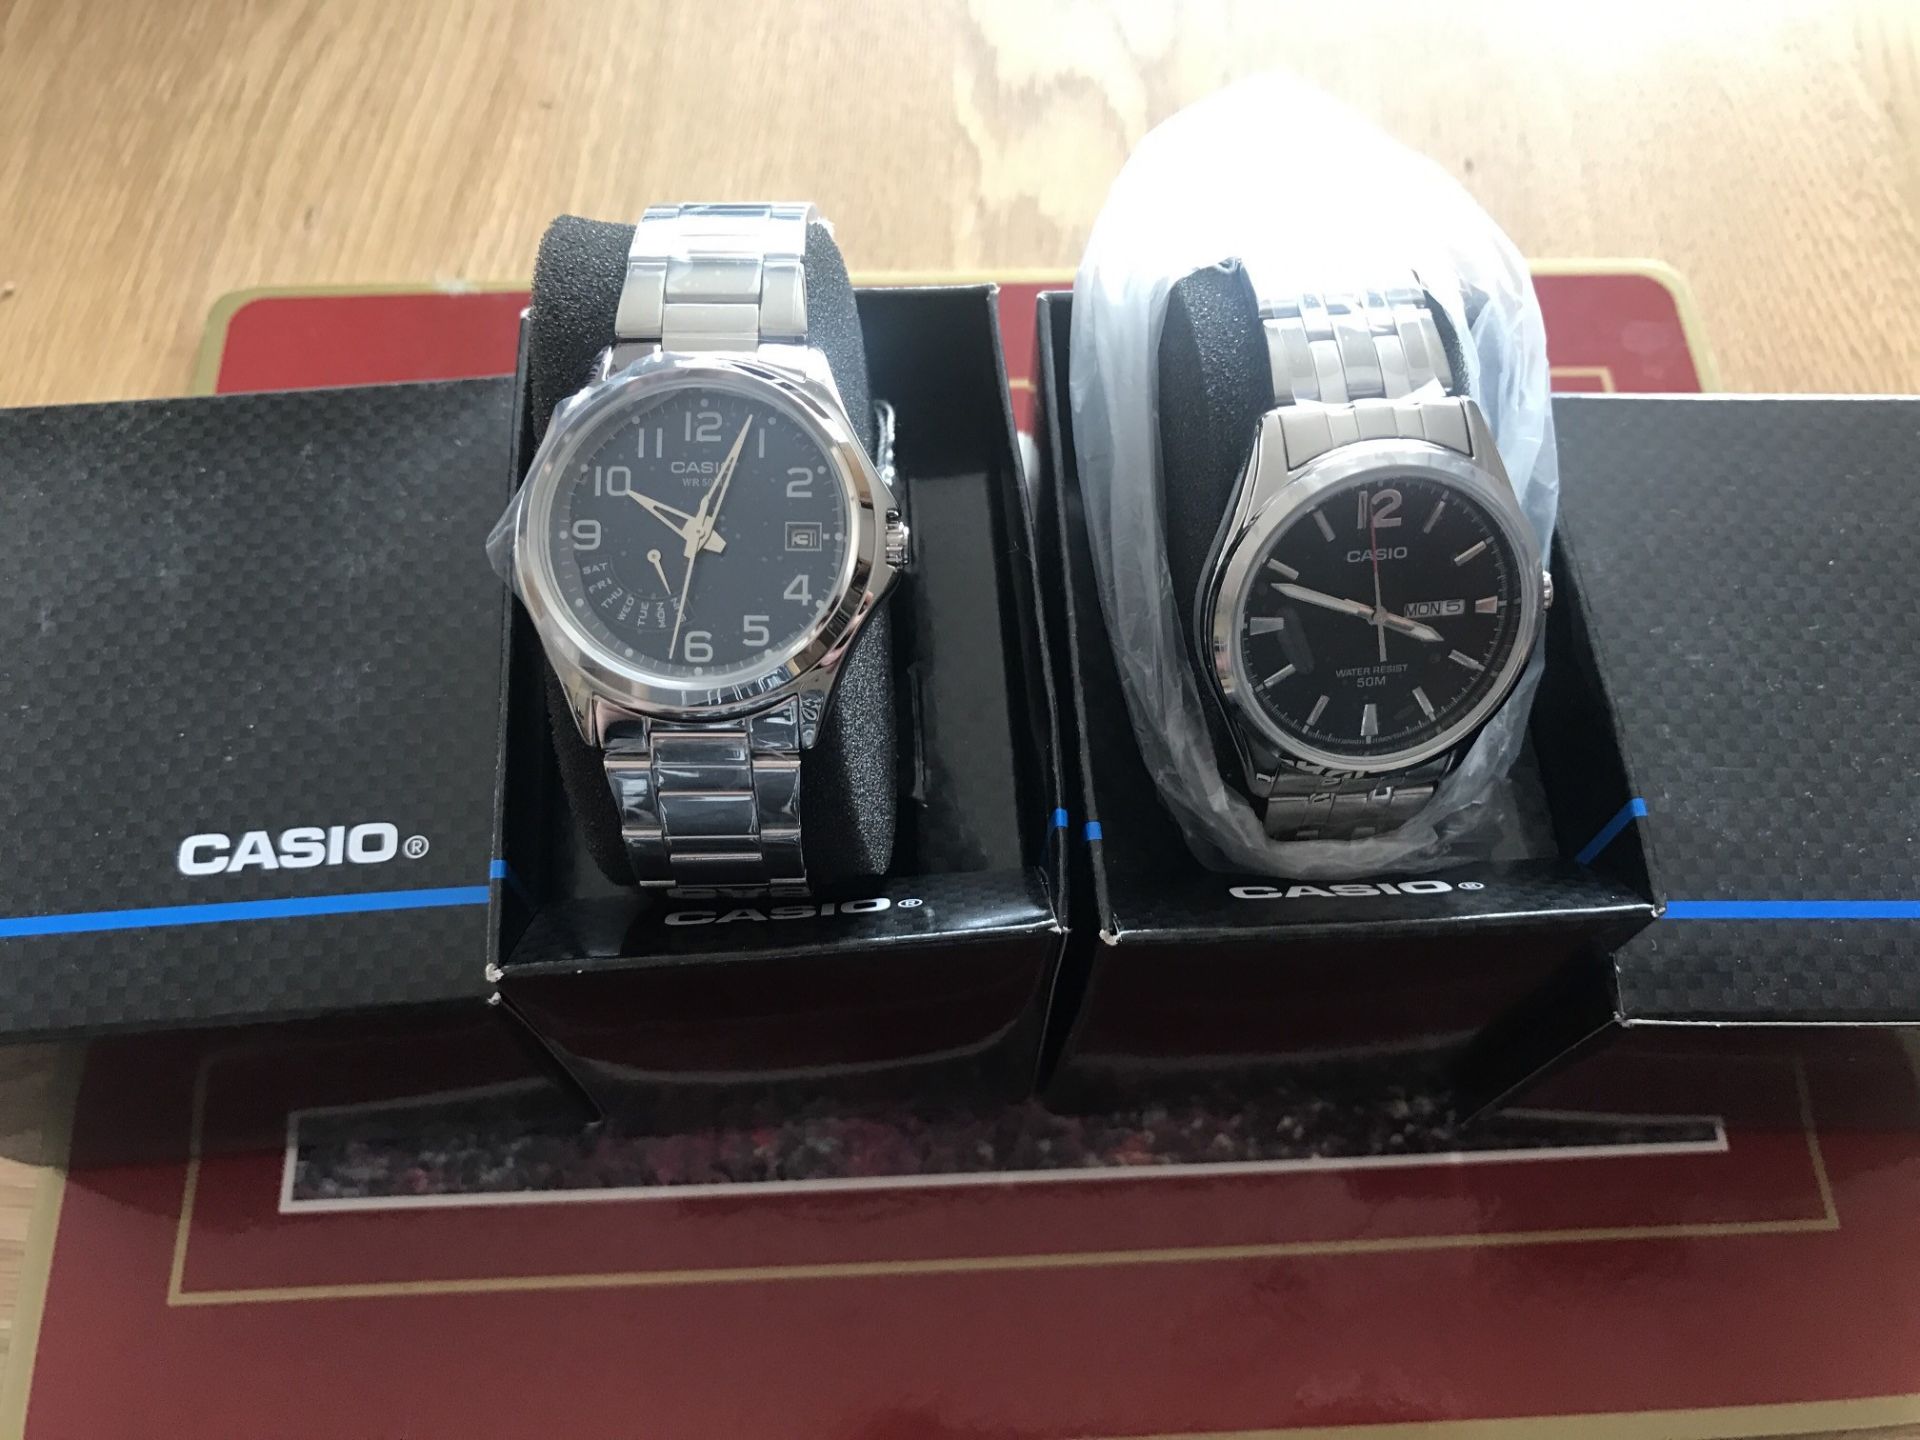 2 x CASIO WATCHES BOXED